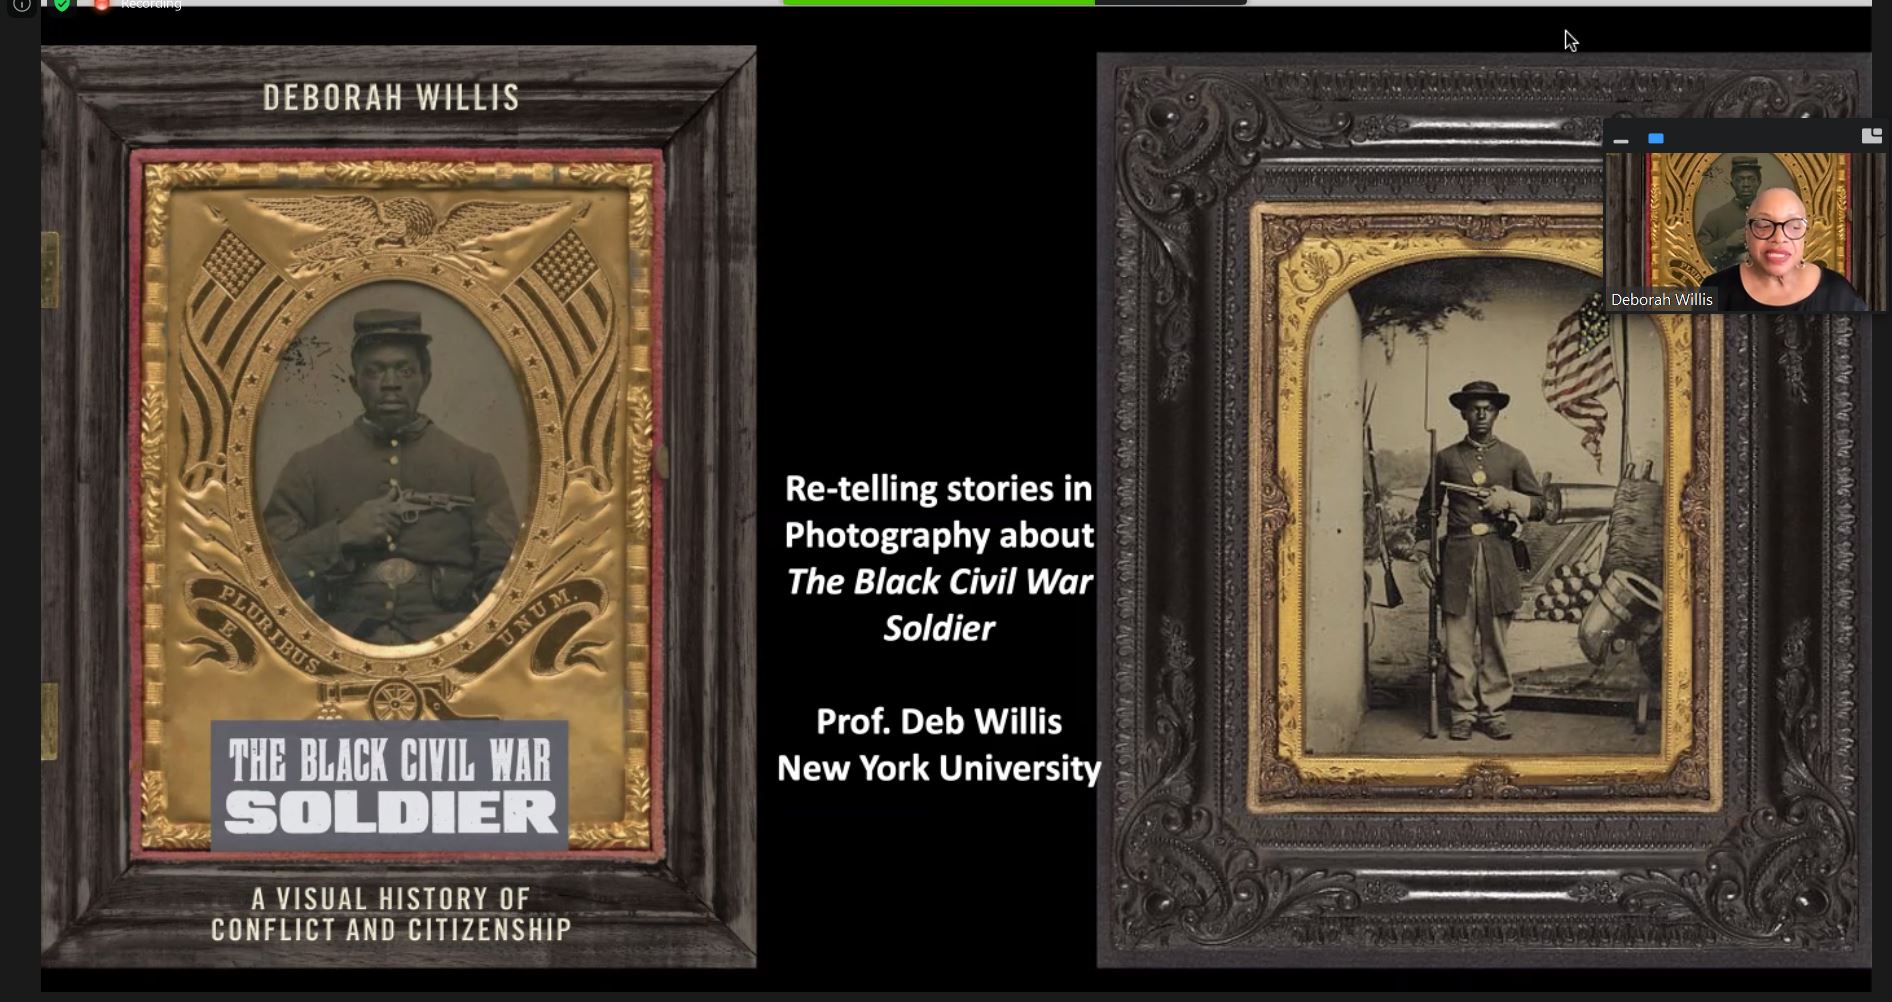 Screen capture showing two Civil War era photos of Black soldiers and a small picture of the speaker, Deborah Willis, in the top right corner